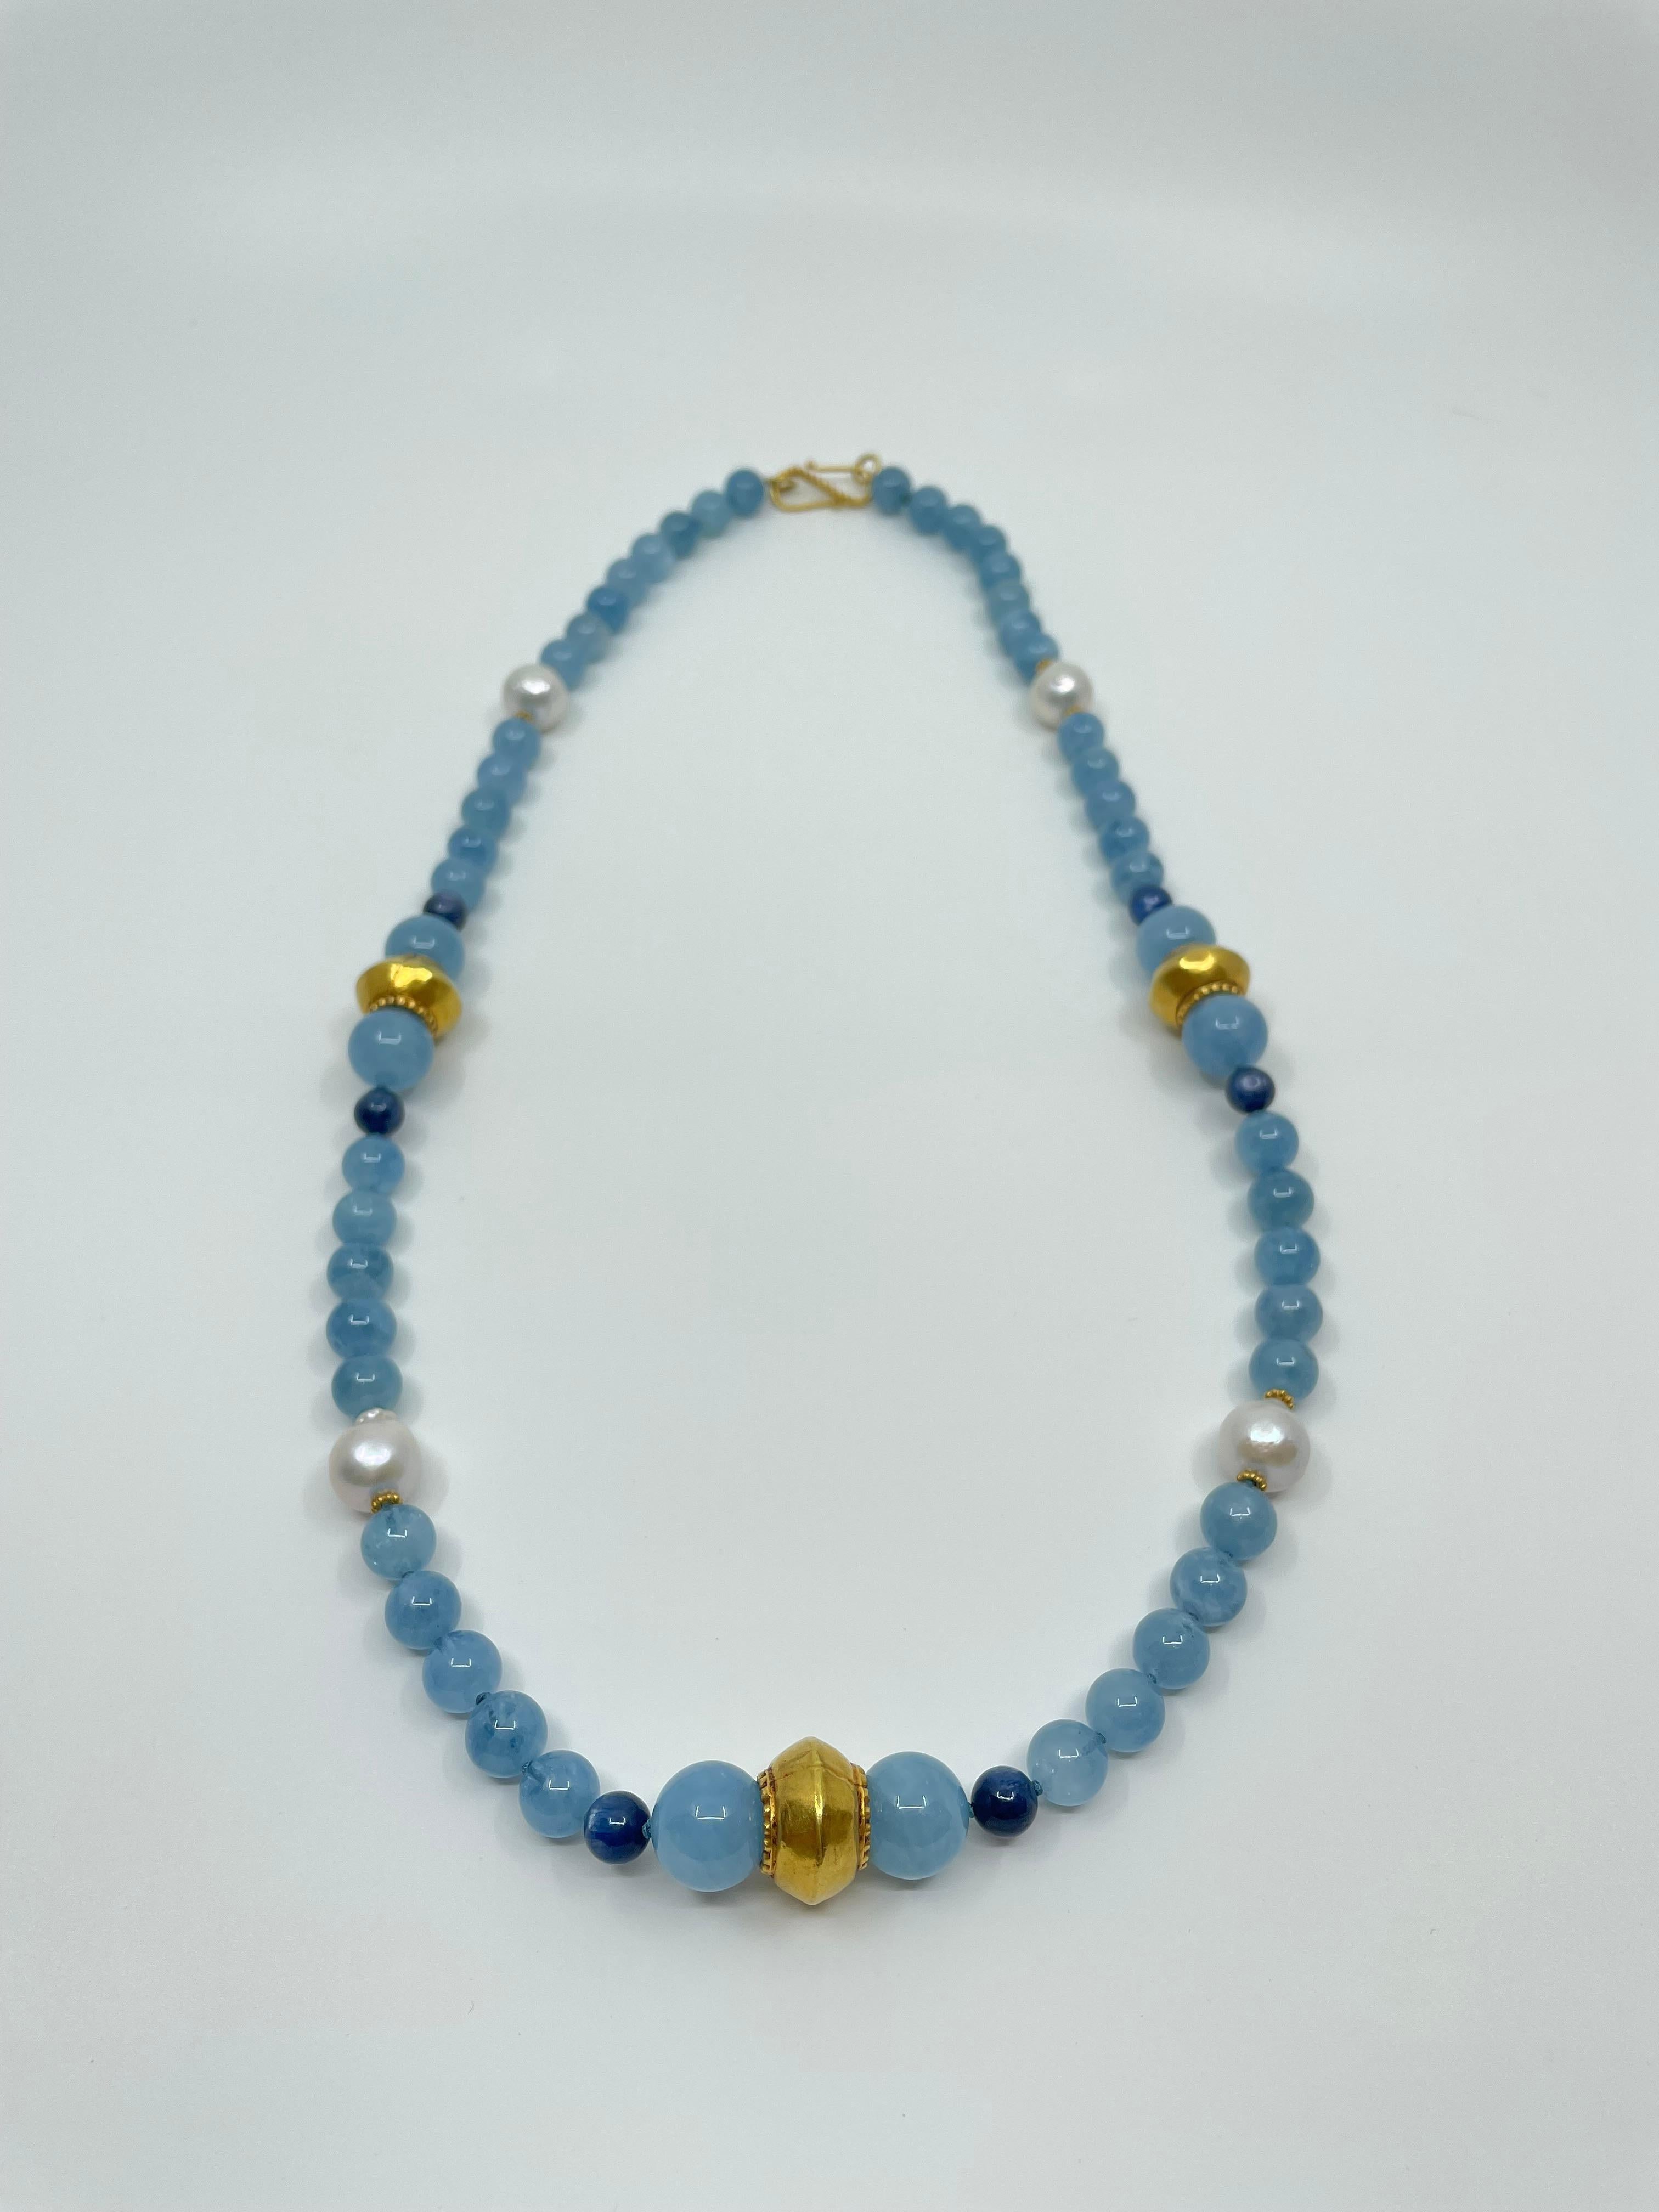 Necklace with Aquamarine, Kyanite, South Sea Pearls, Gold & 18K Gold For Sale 3